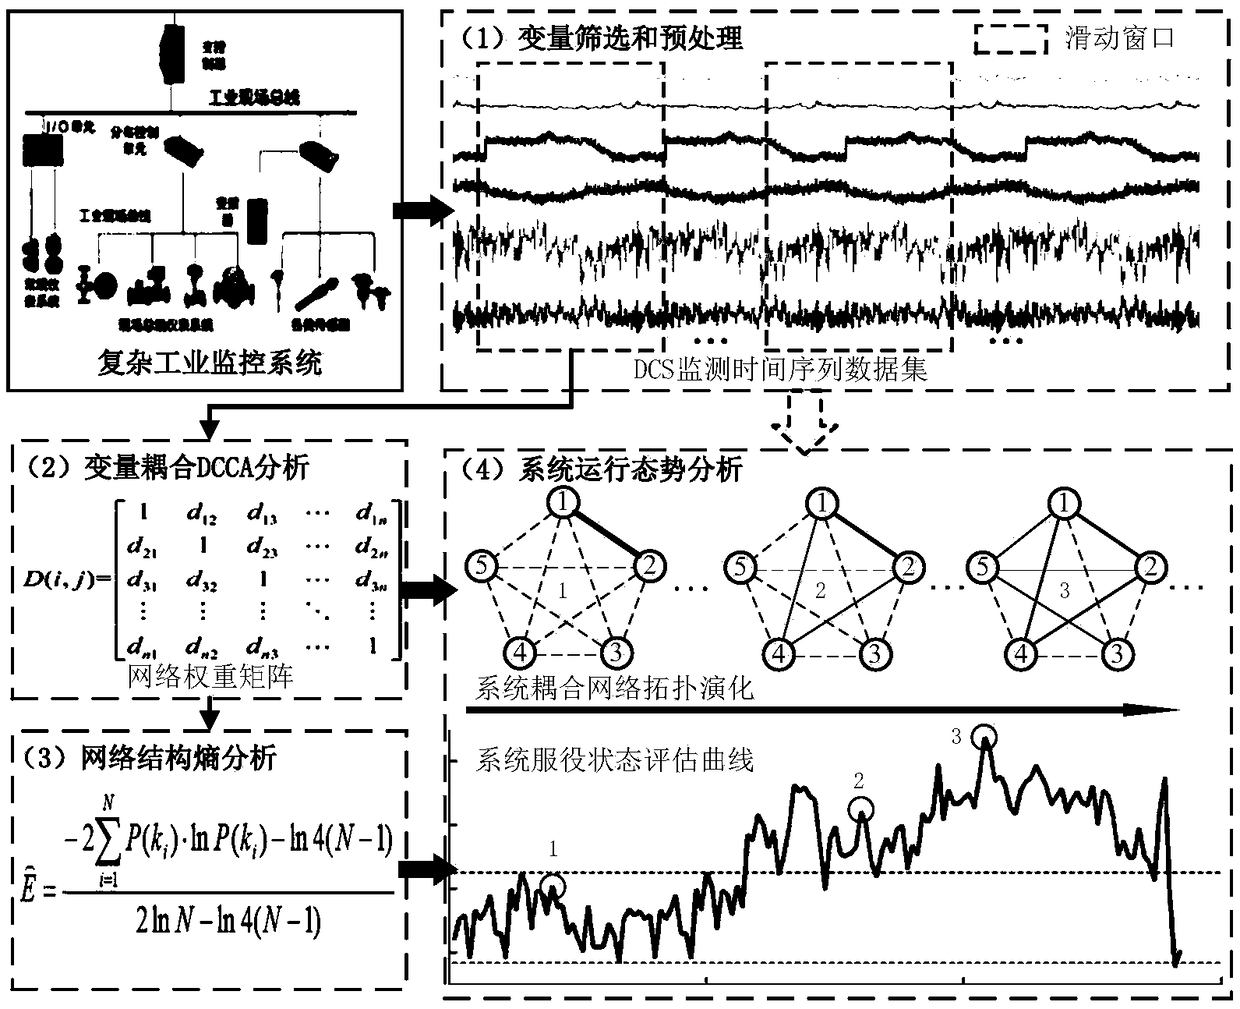 Assessment method for coupling state of process industrial electromechanical system based on network structure entropy